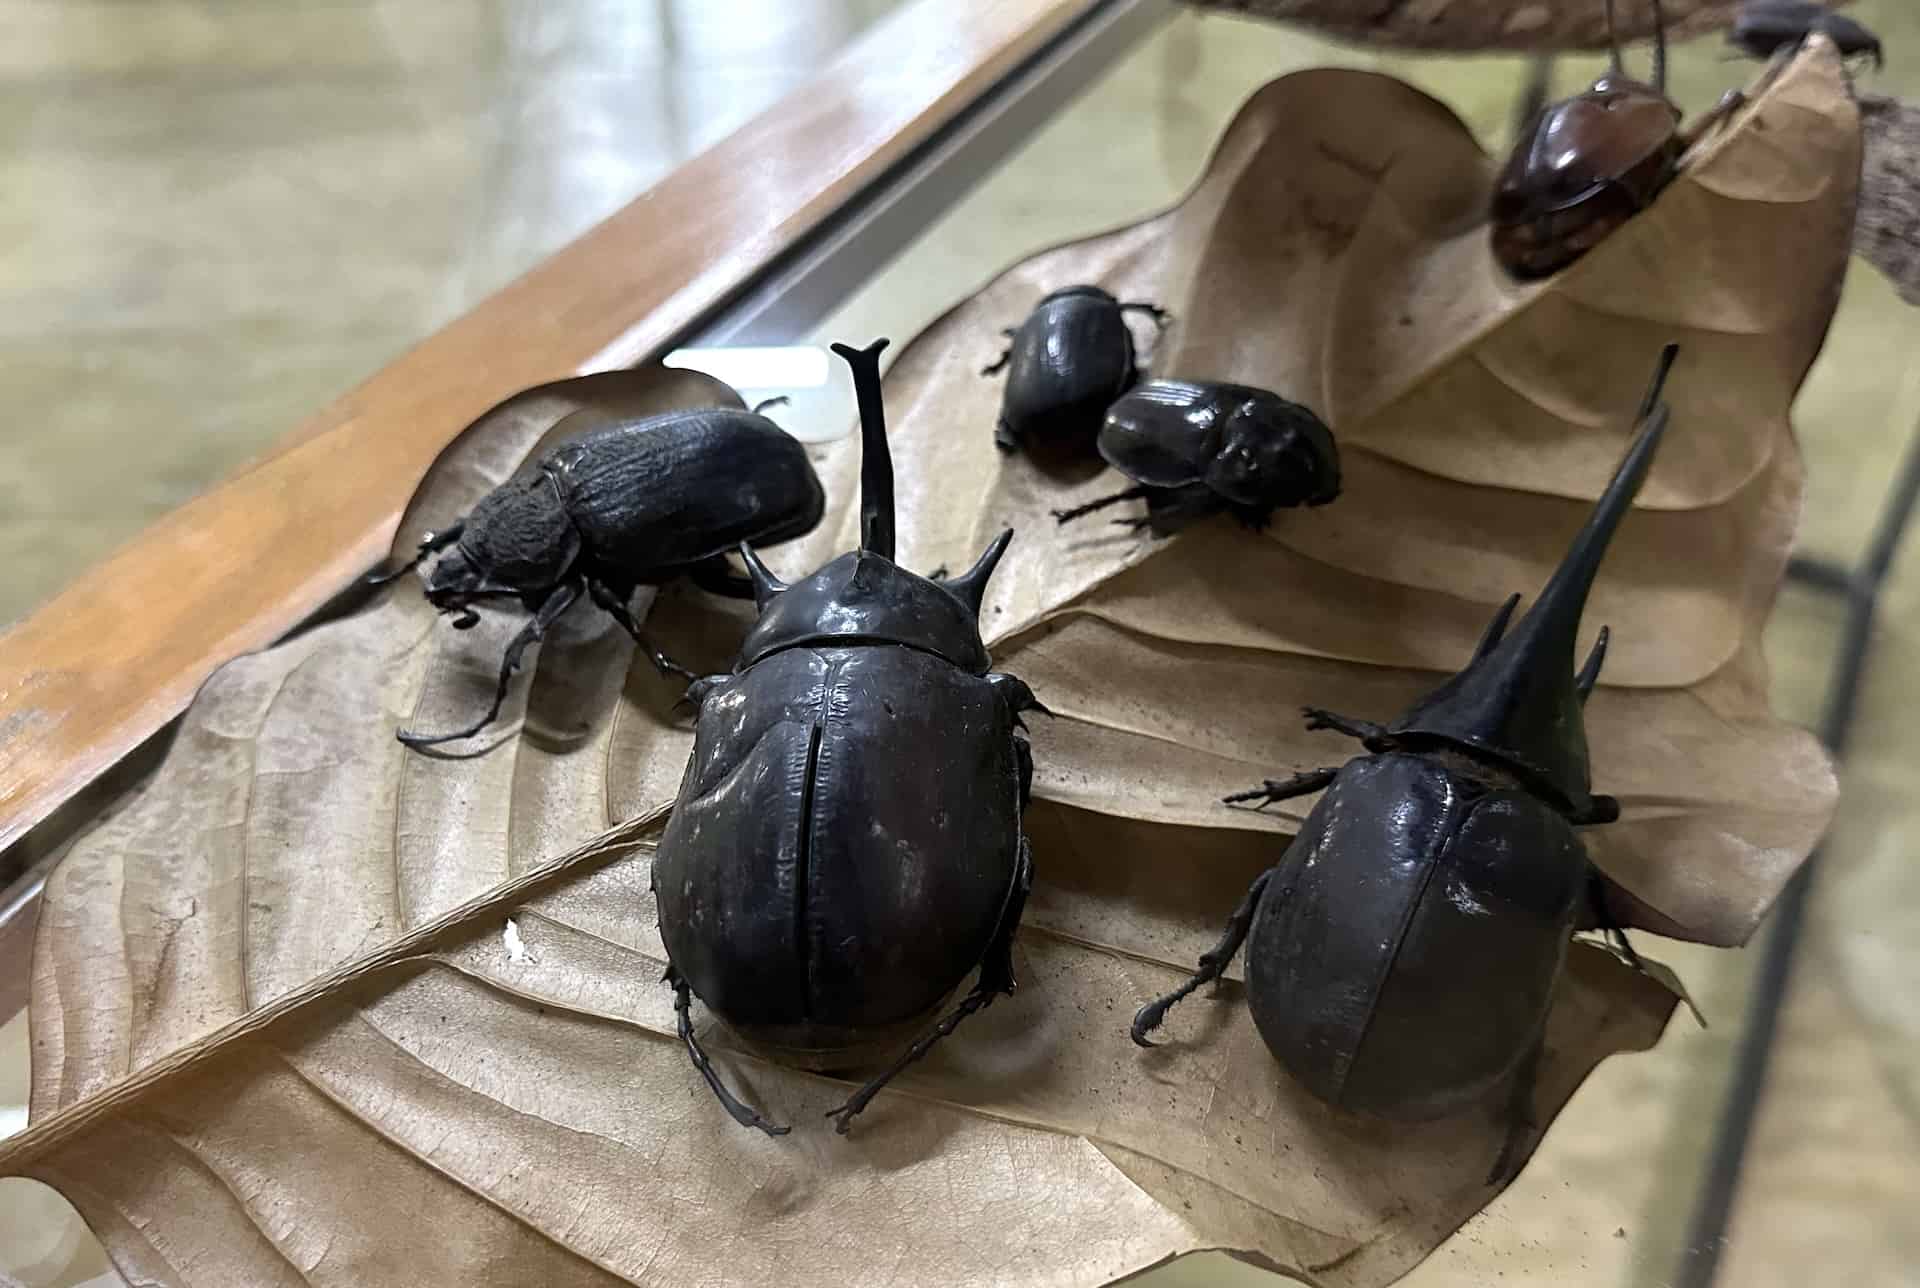 Beetles at the Insectarium